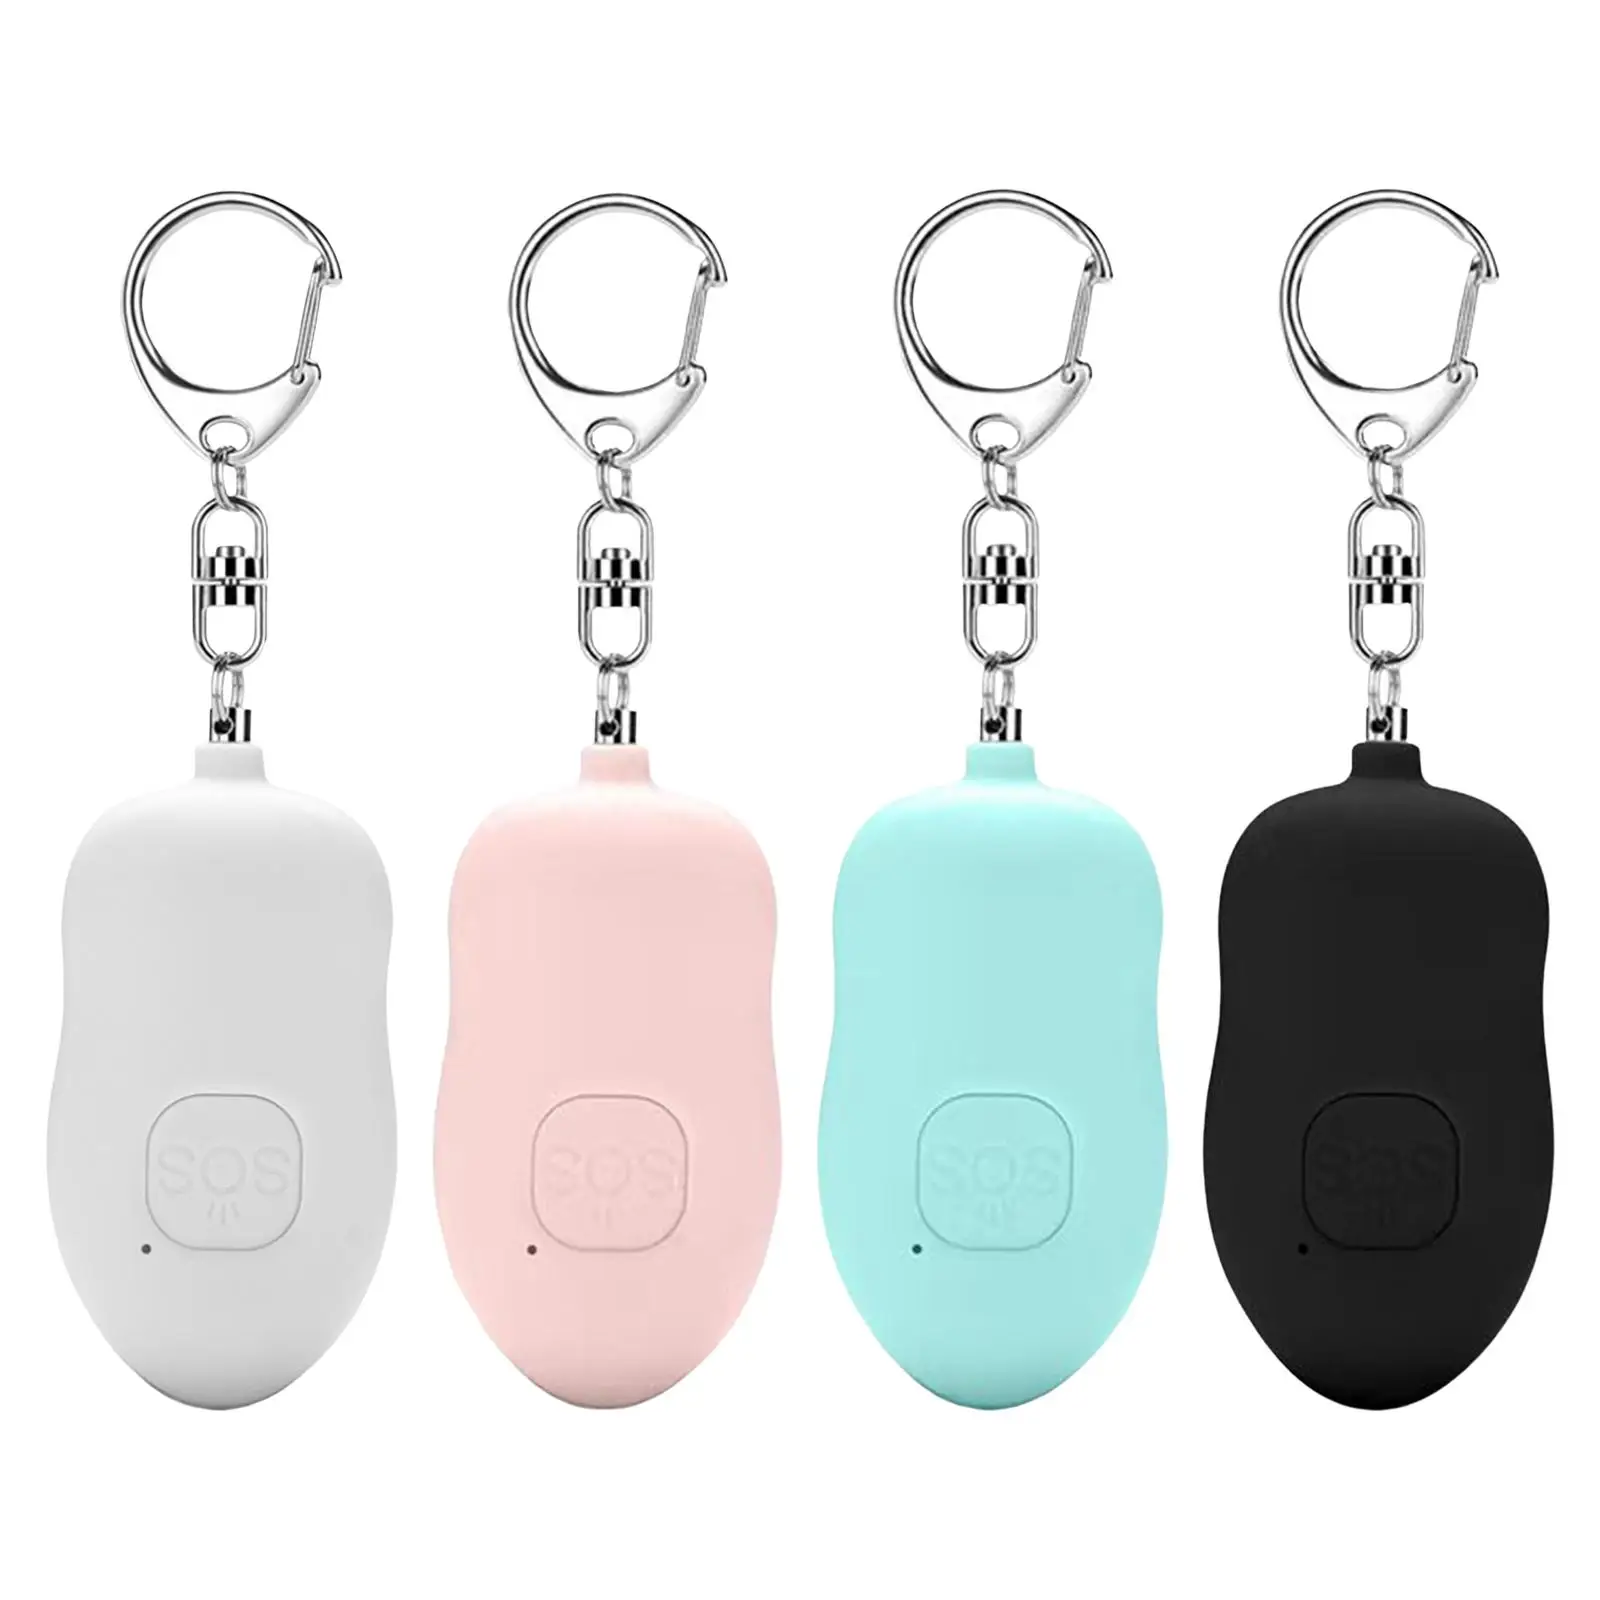 Personal Alarm Emergency LED Flashlight Quick Charging Whistle Security Alarm Keychain for Night Running